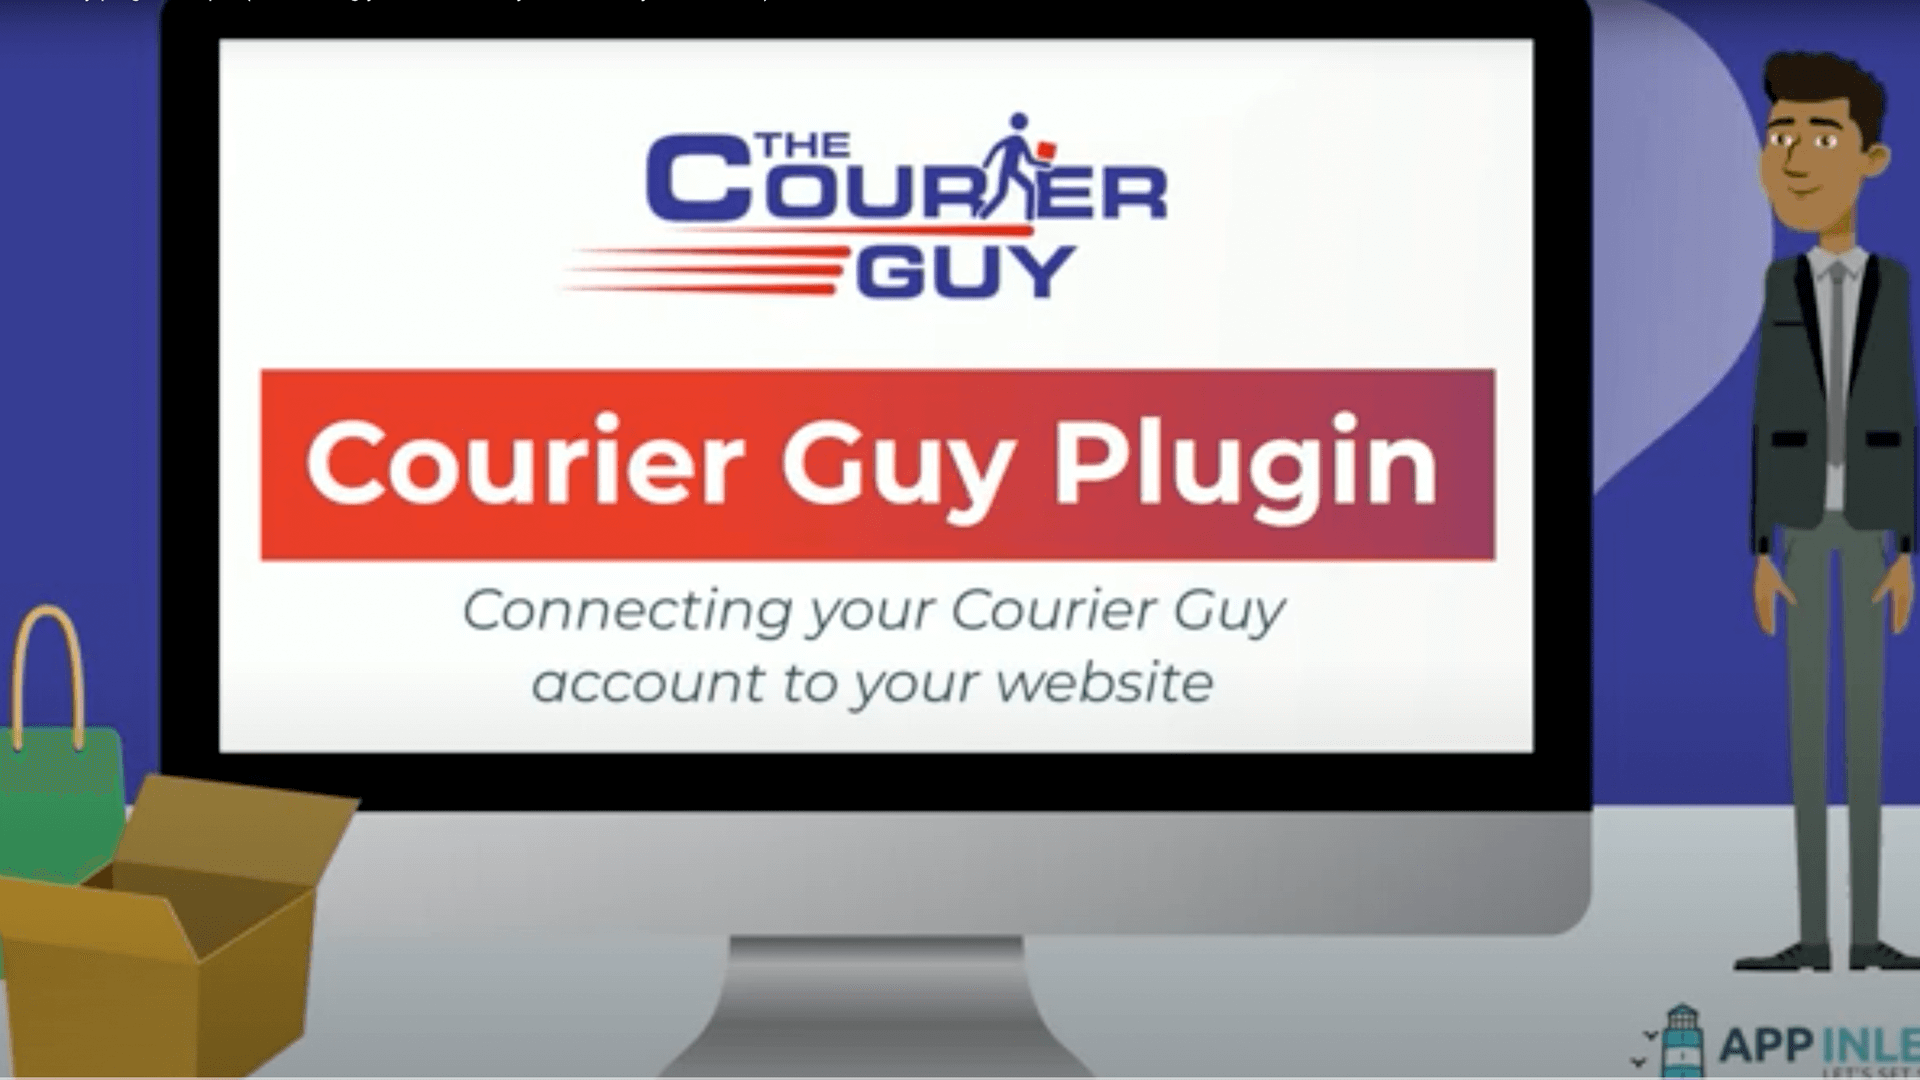 Step 2 (Connecting your Courier Guy account to your website)